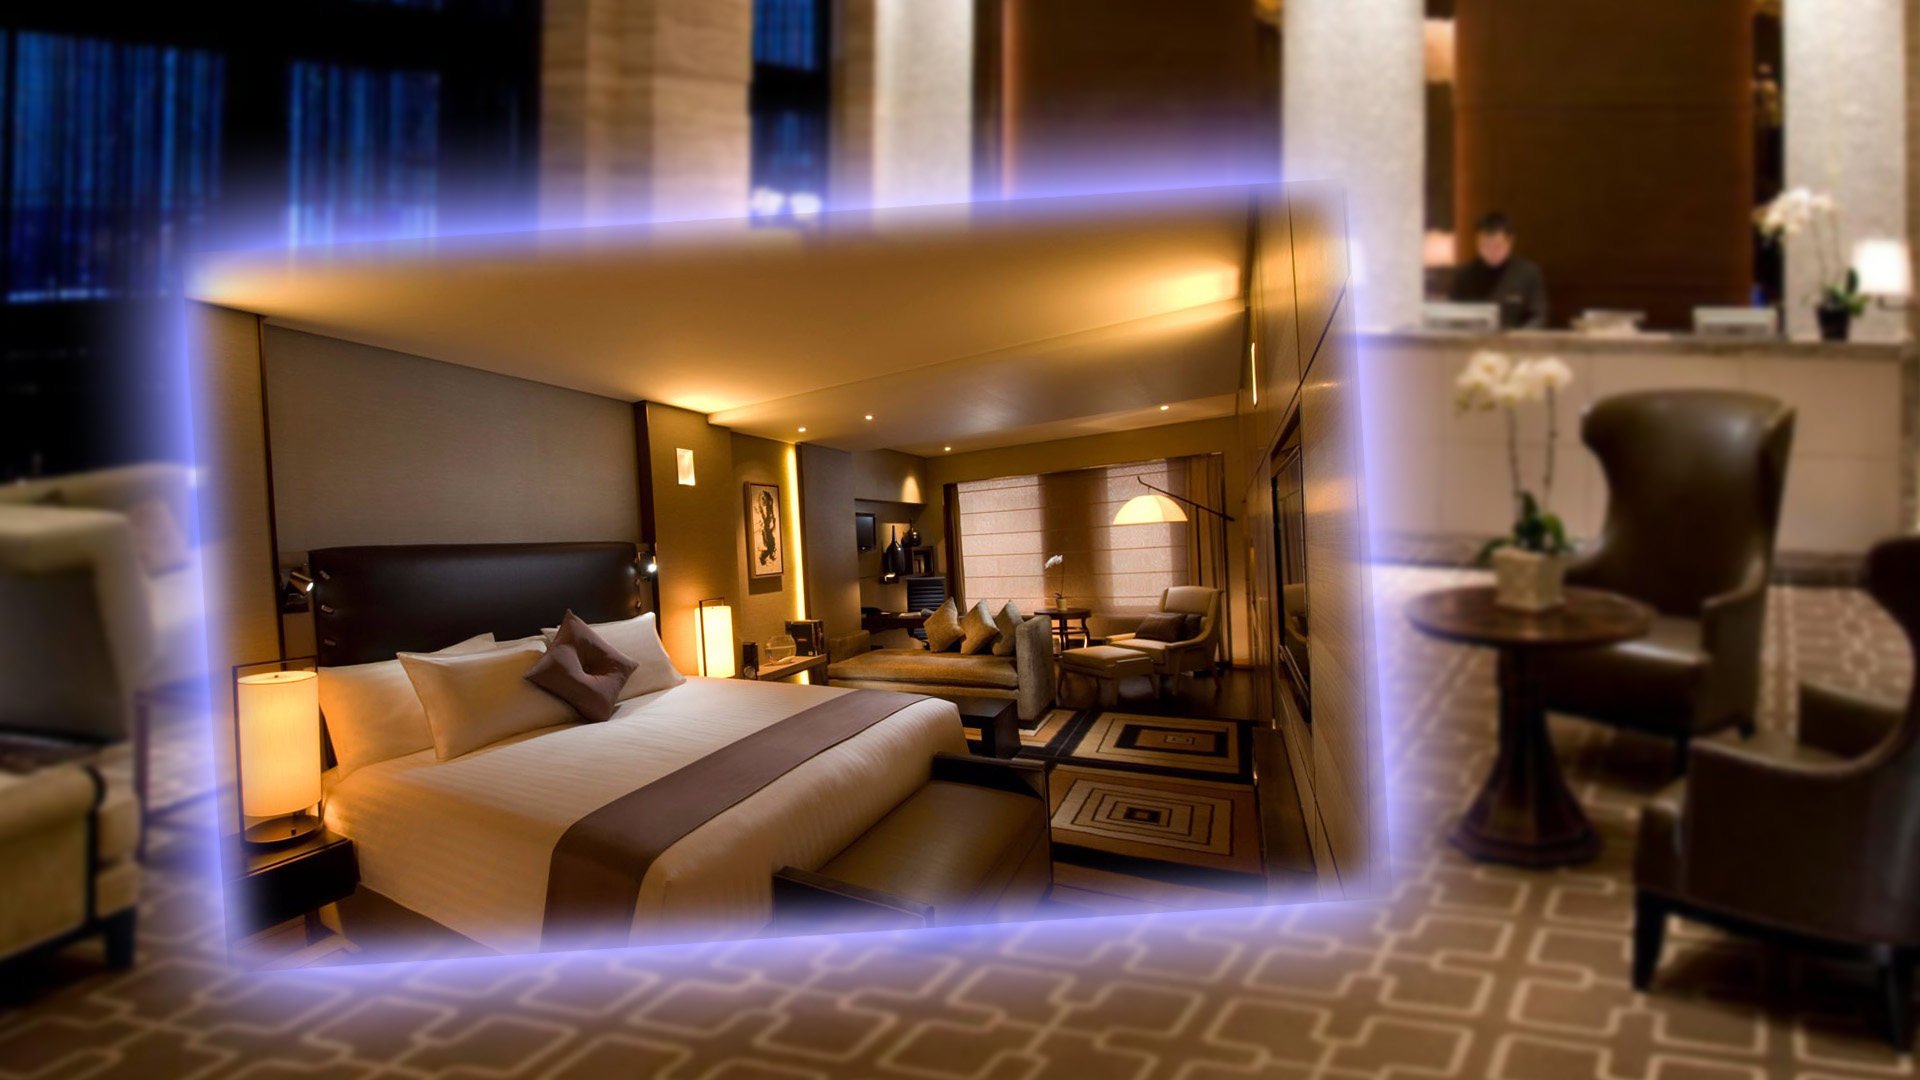 A top hotel in China’s capital has come under scrutiny after it imposed a fine on a VIP guest after surveillance footage showed he did not stay in his room overnight, leading to suspicions that he had resold the room for a profit. Photo: SCMP composite/hilton.com.cn  